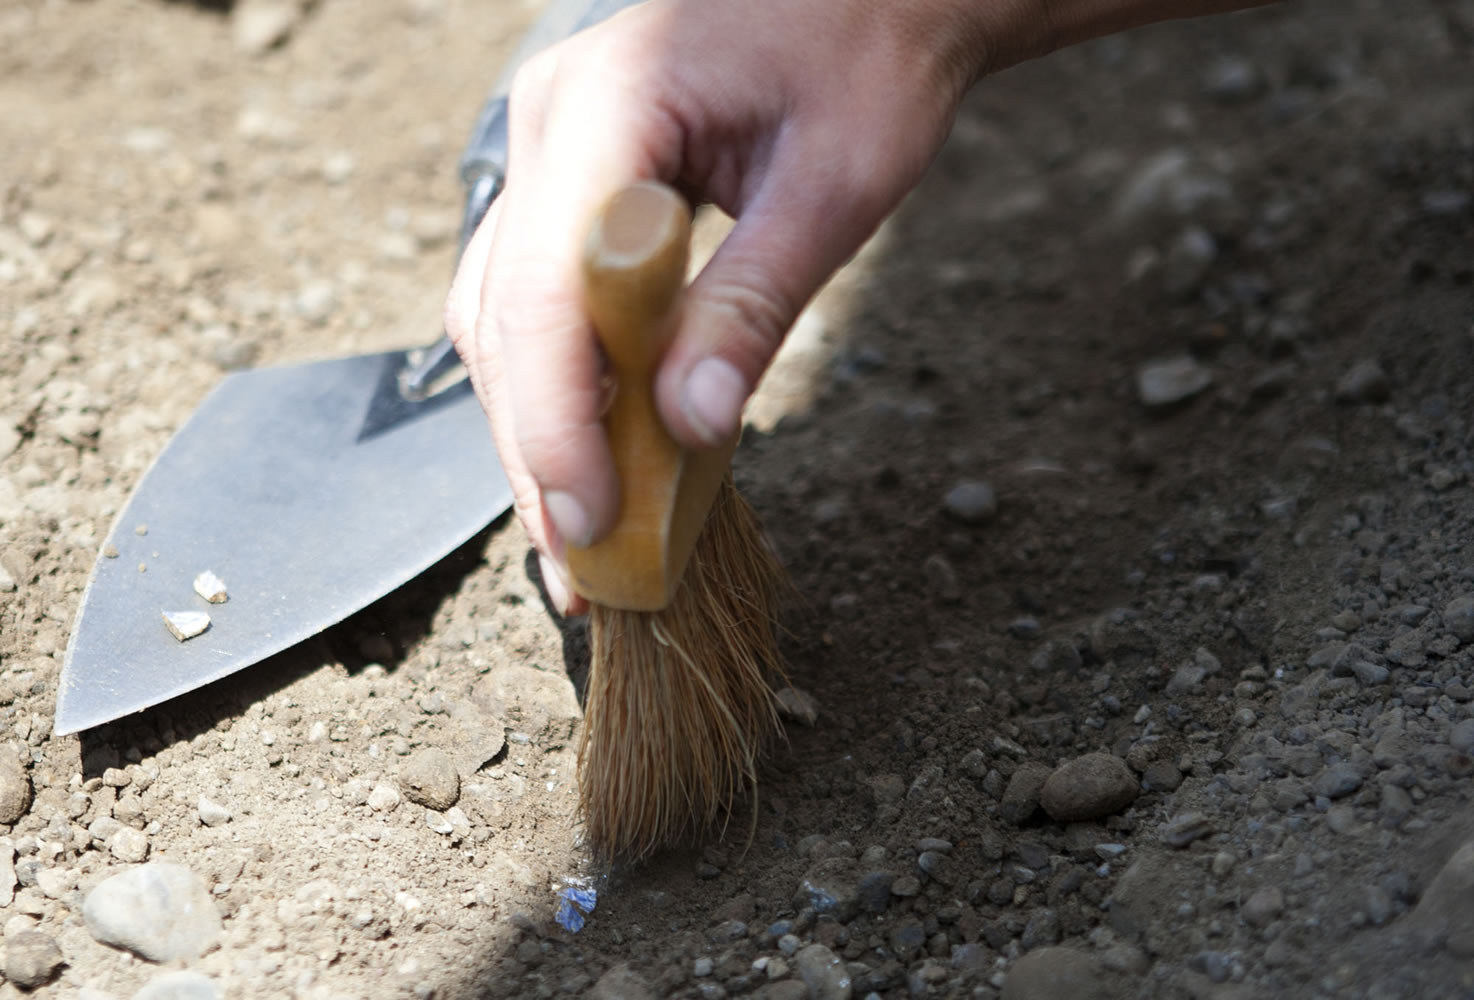 Caitlin Wichlacz, Washington State University Vancouver teaching assistant, brushes dirt from a ceramic fragment.